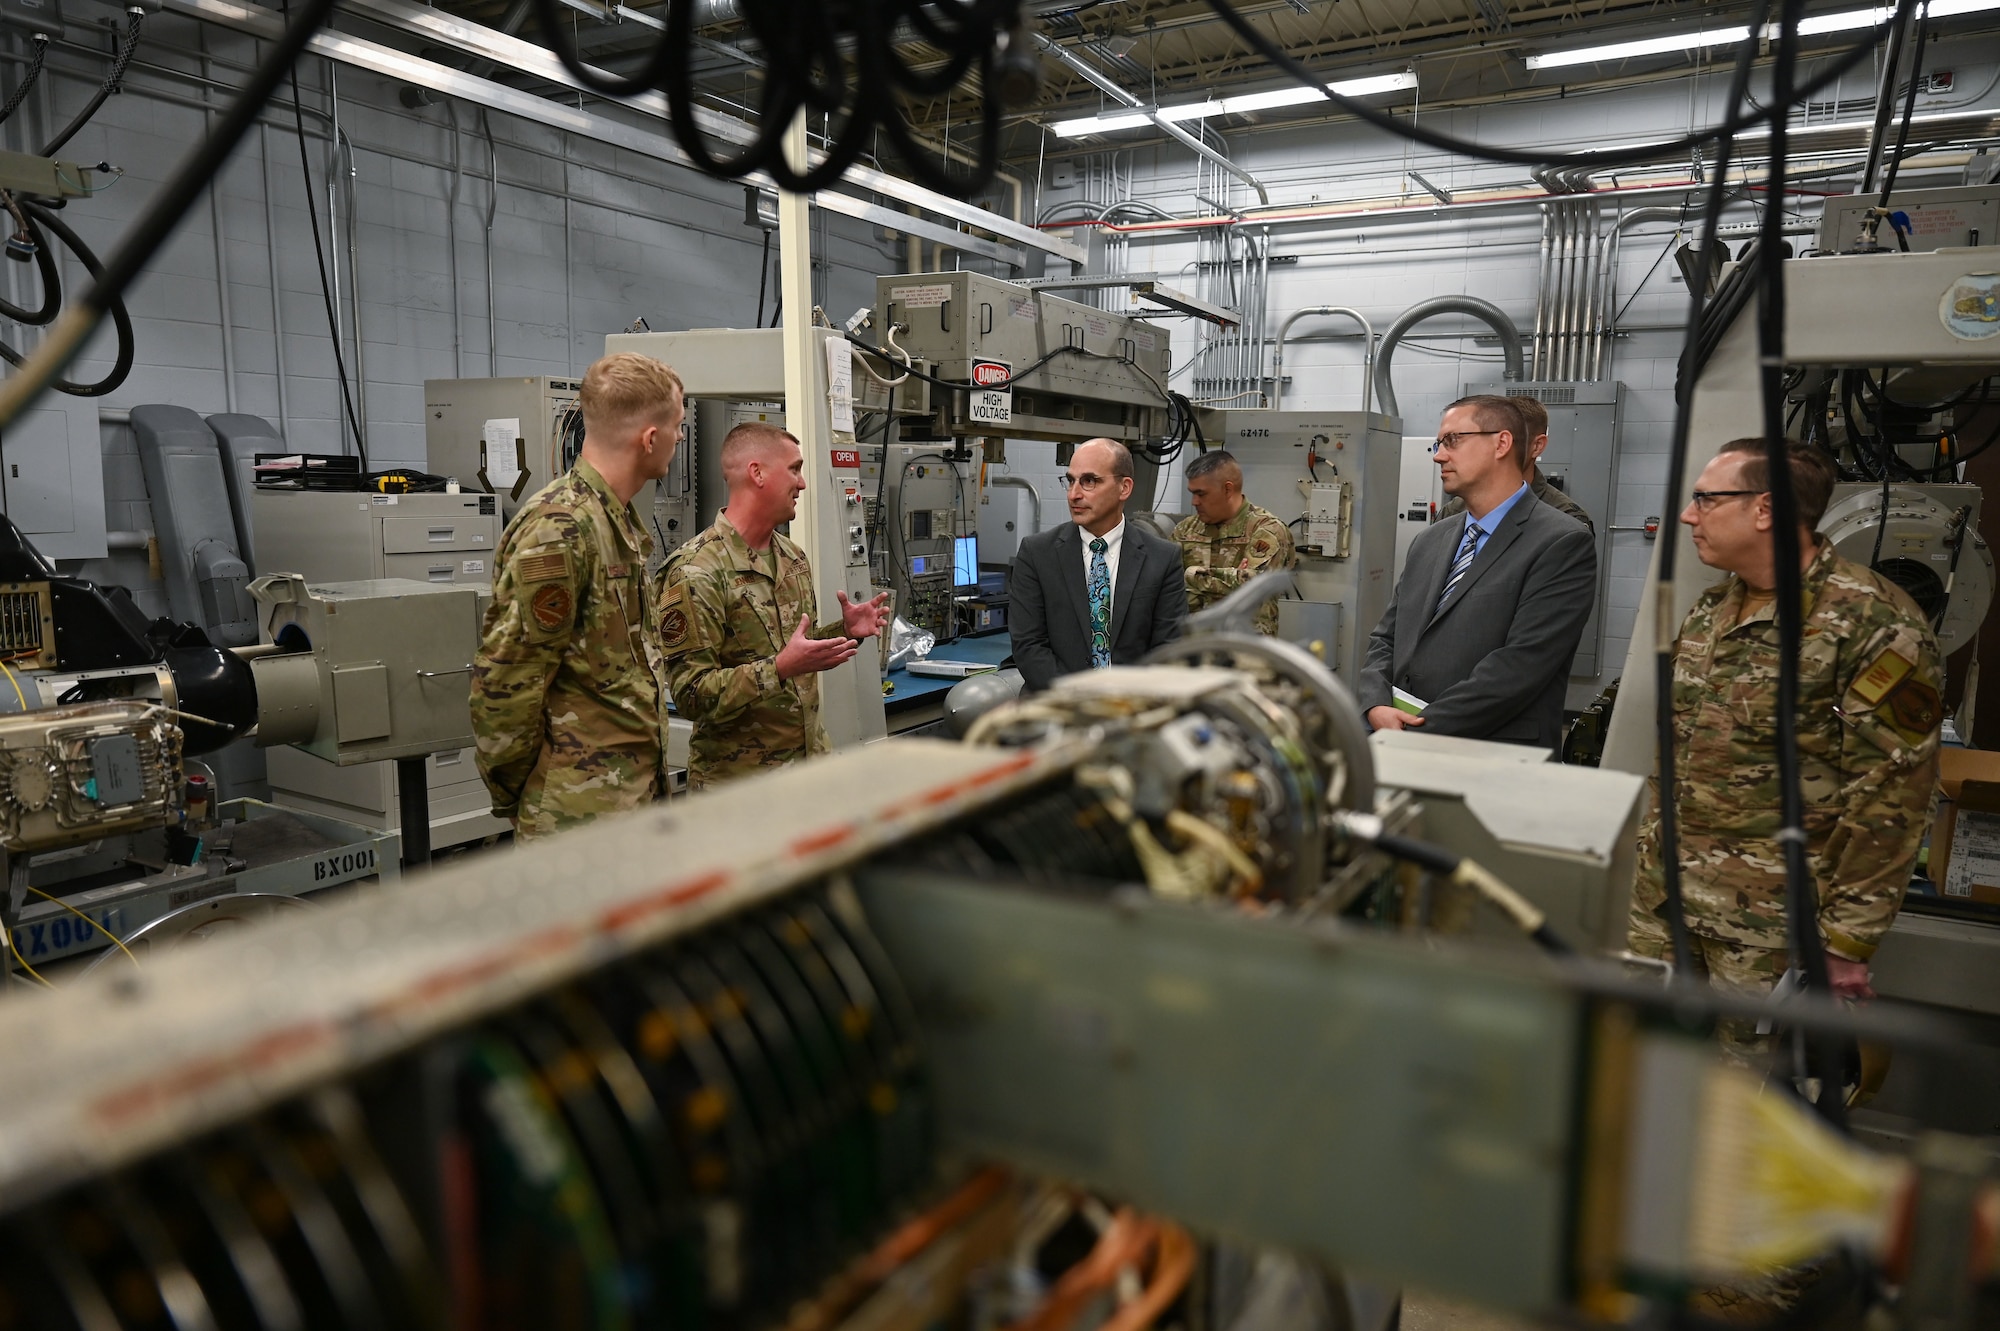 U.S. Air Force Staff Sgt. Jared Henderson, 36th Electronic Warfare Squadron technician, left, Master Sgt. Andrew Jennings, 36th EWS flight chief, left -center, brief John F. Vona, Air Combat Command deputy director of the plans, program and requirements directorate, center, and Dr. John D. Matyjas, ACC chief scientist, right, about the Reclamation of Electronic Attack Pods (REAP) at Eglin Air Force Base, Fla., April 11, 2023. The REAP program aims to leverage resources from the 350th Spectrum Warfare Wing and provide the receiving, diagnostic testing, recoupment, and shipment of EA pod equipment back into the supply chain for future use. (U.S. Air Force photo by Staff Sgt. Ericka A. Woolever)